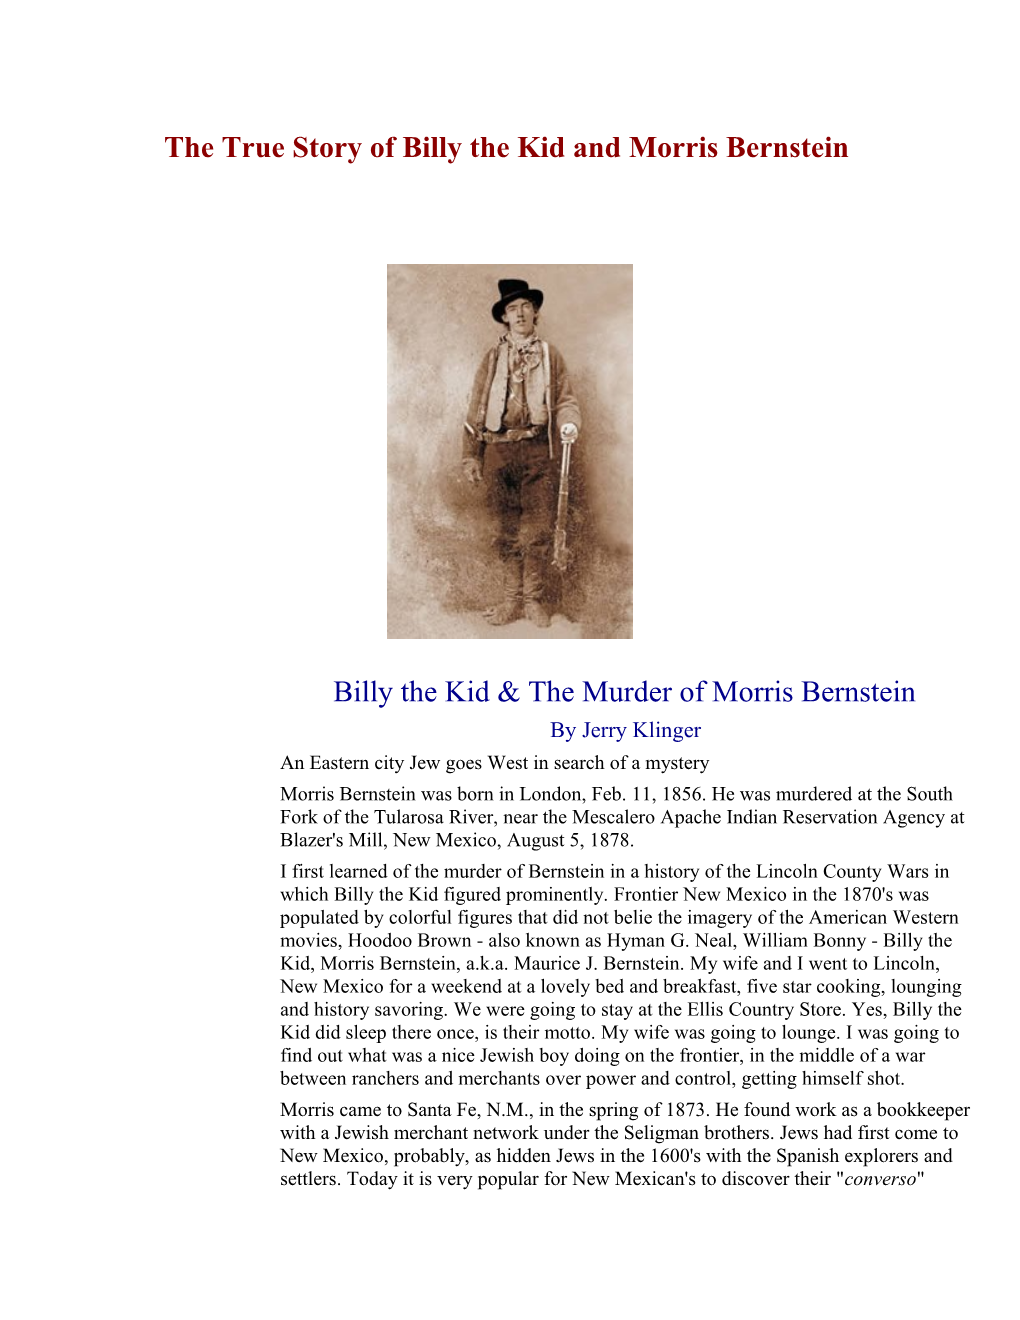 The True Story of Billy the Kid and Morris Bernstein